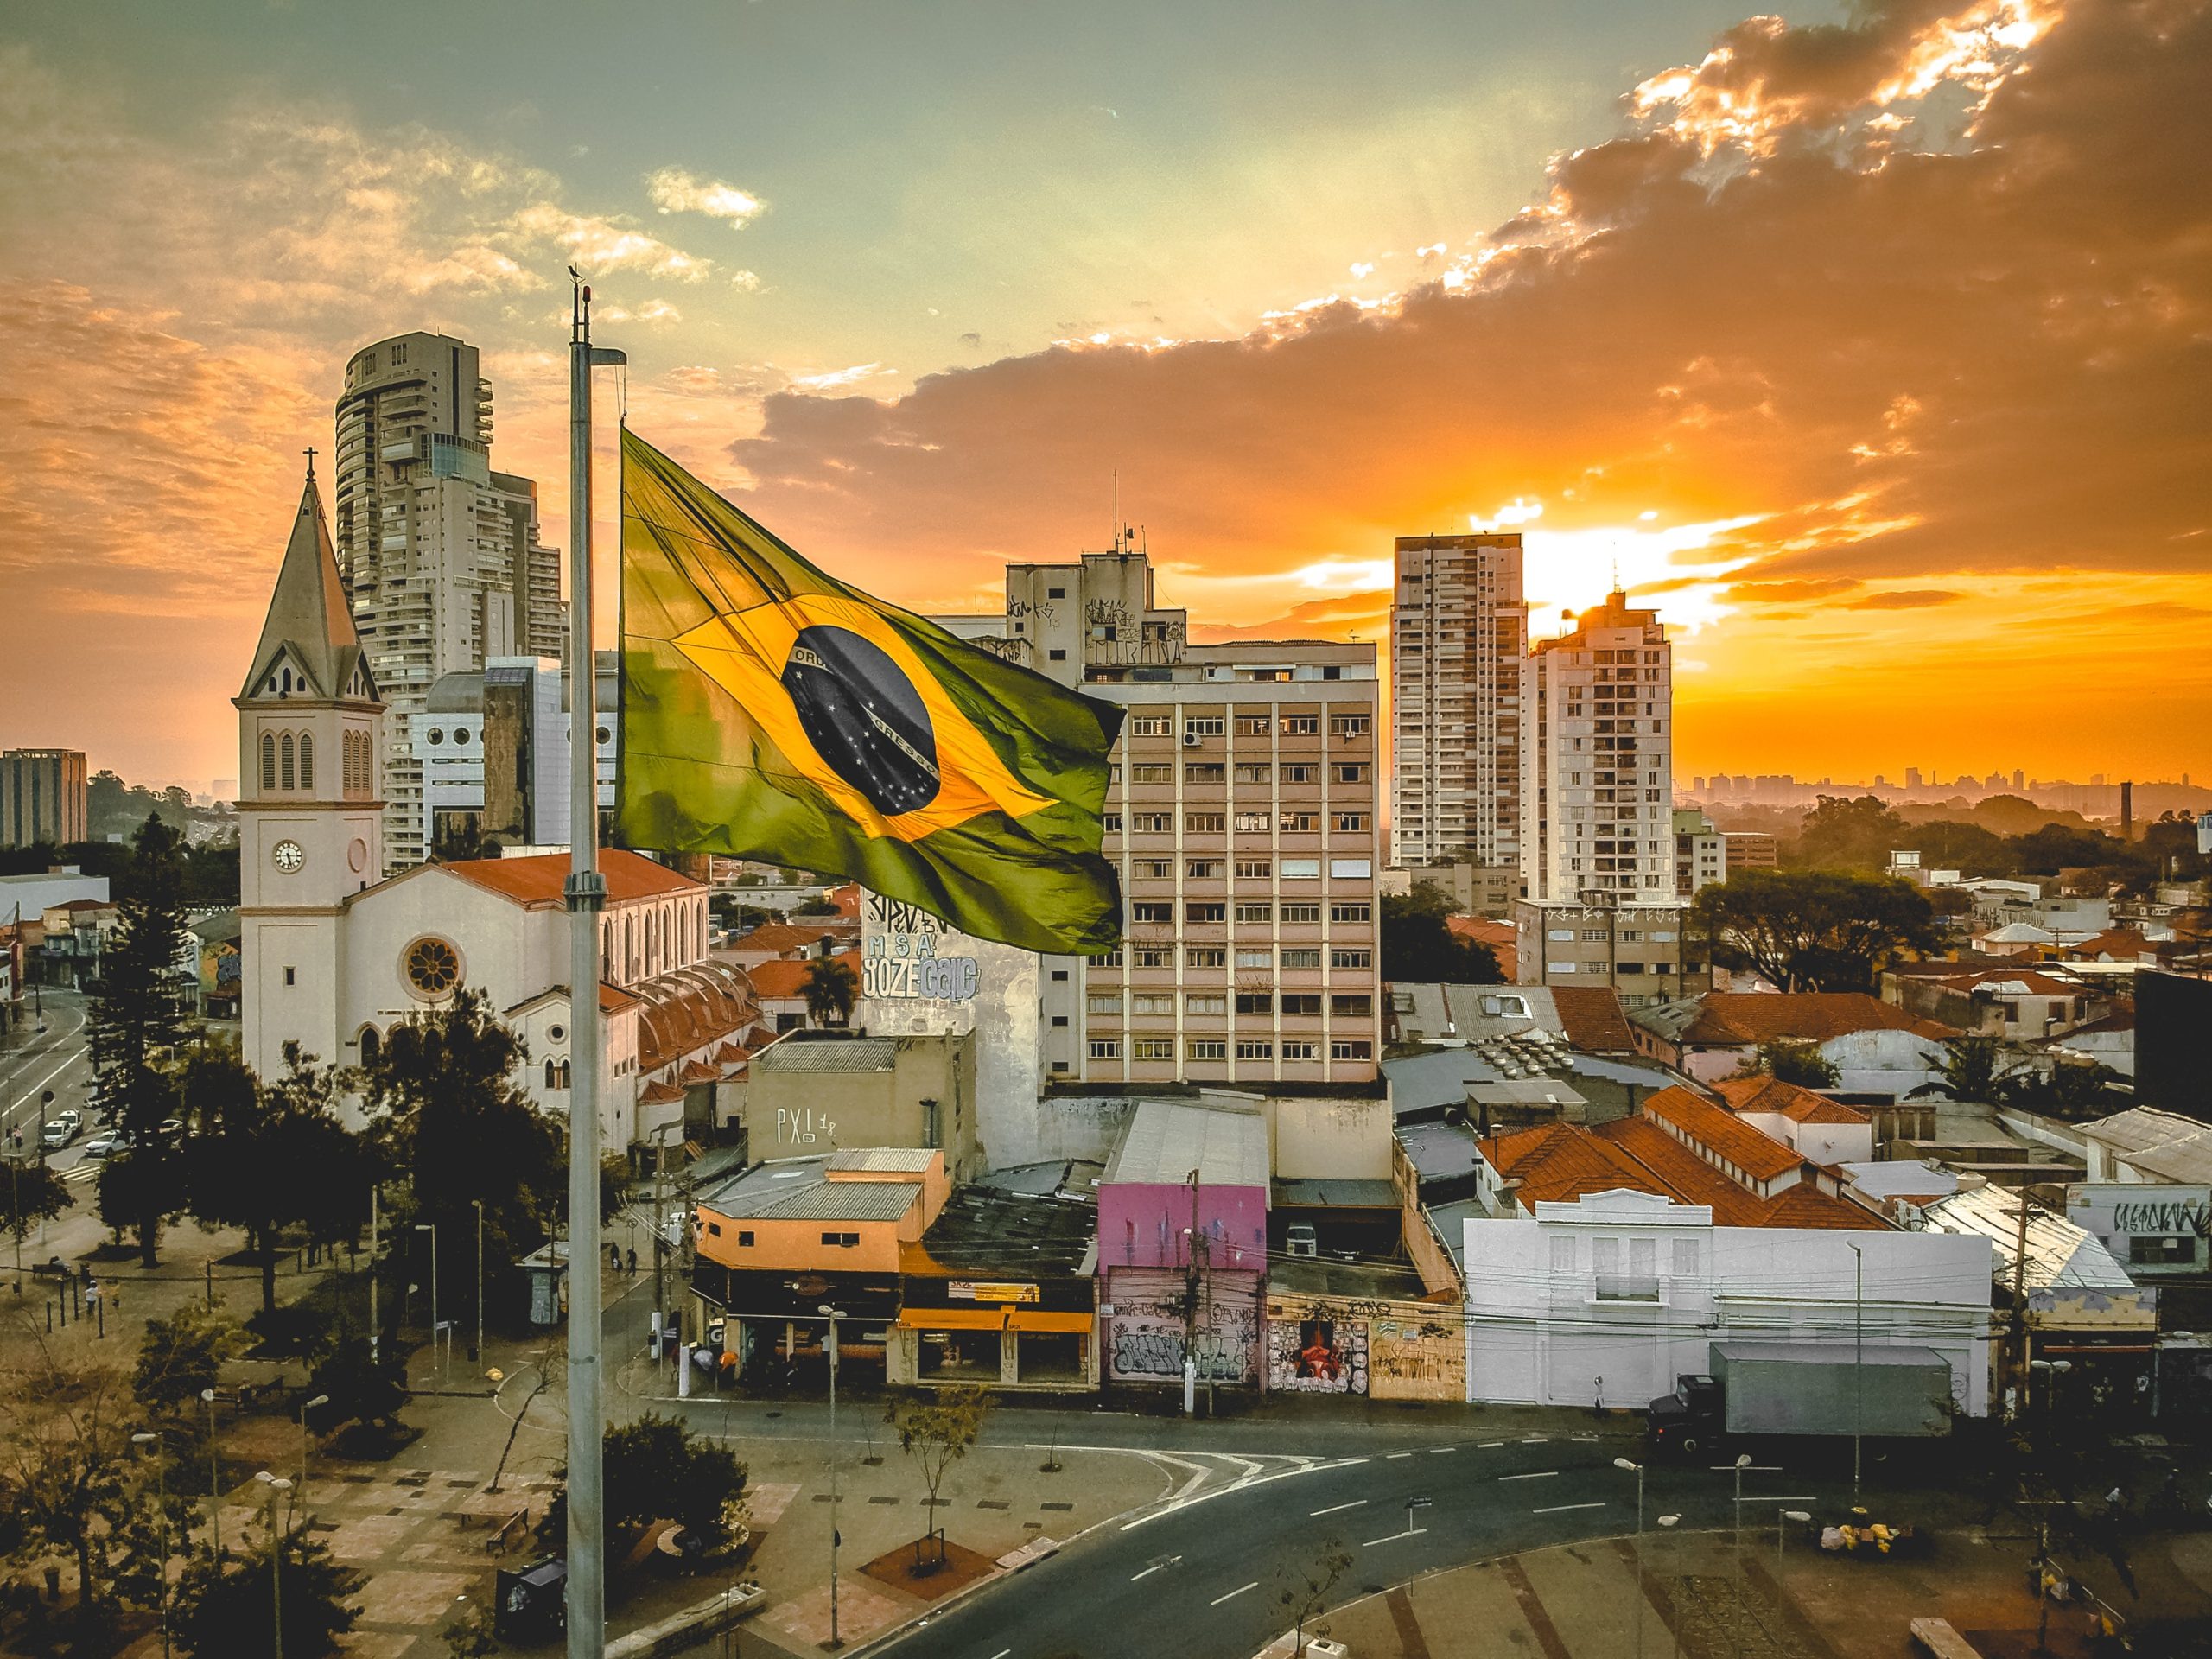 Belo Horizonte and Sao Paulo’s Founder Institute early admissions deadlines are on April 26th